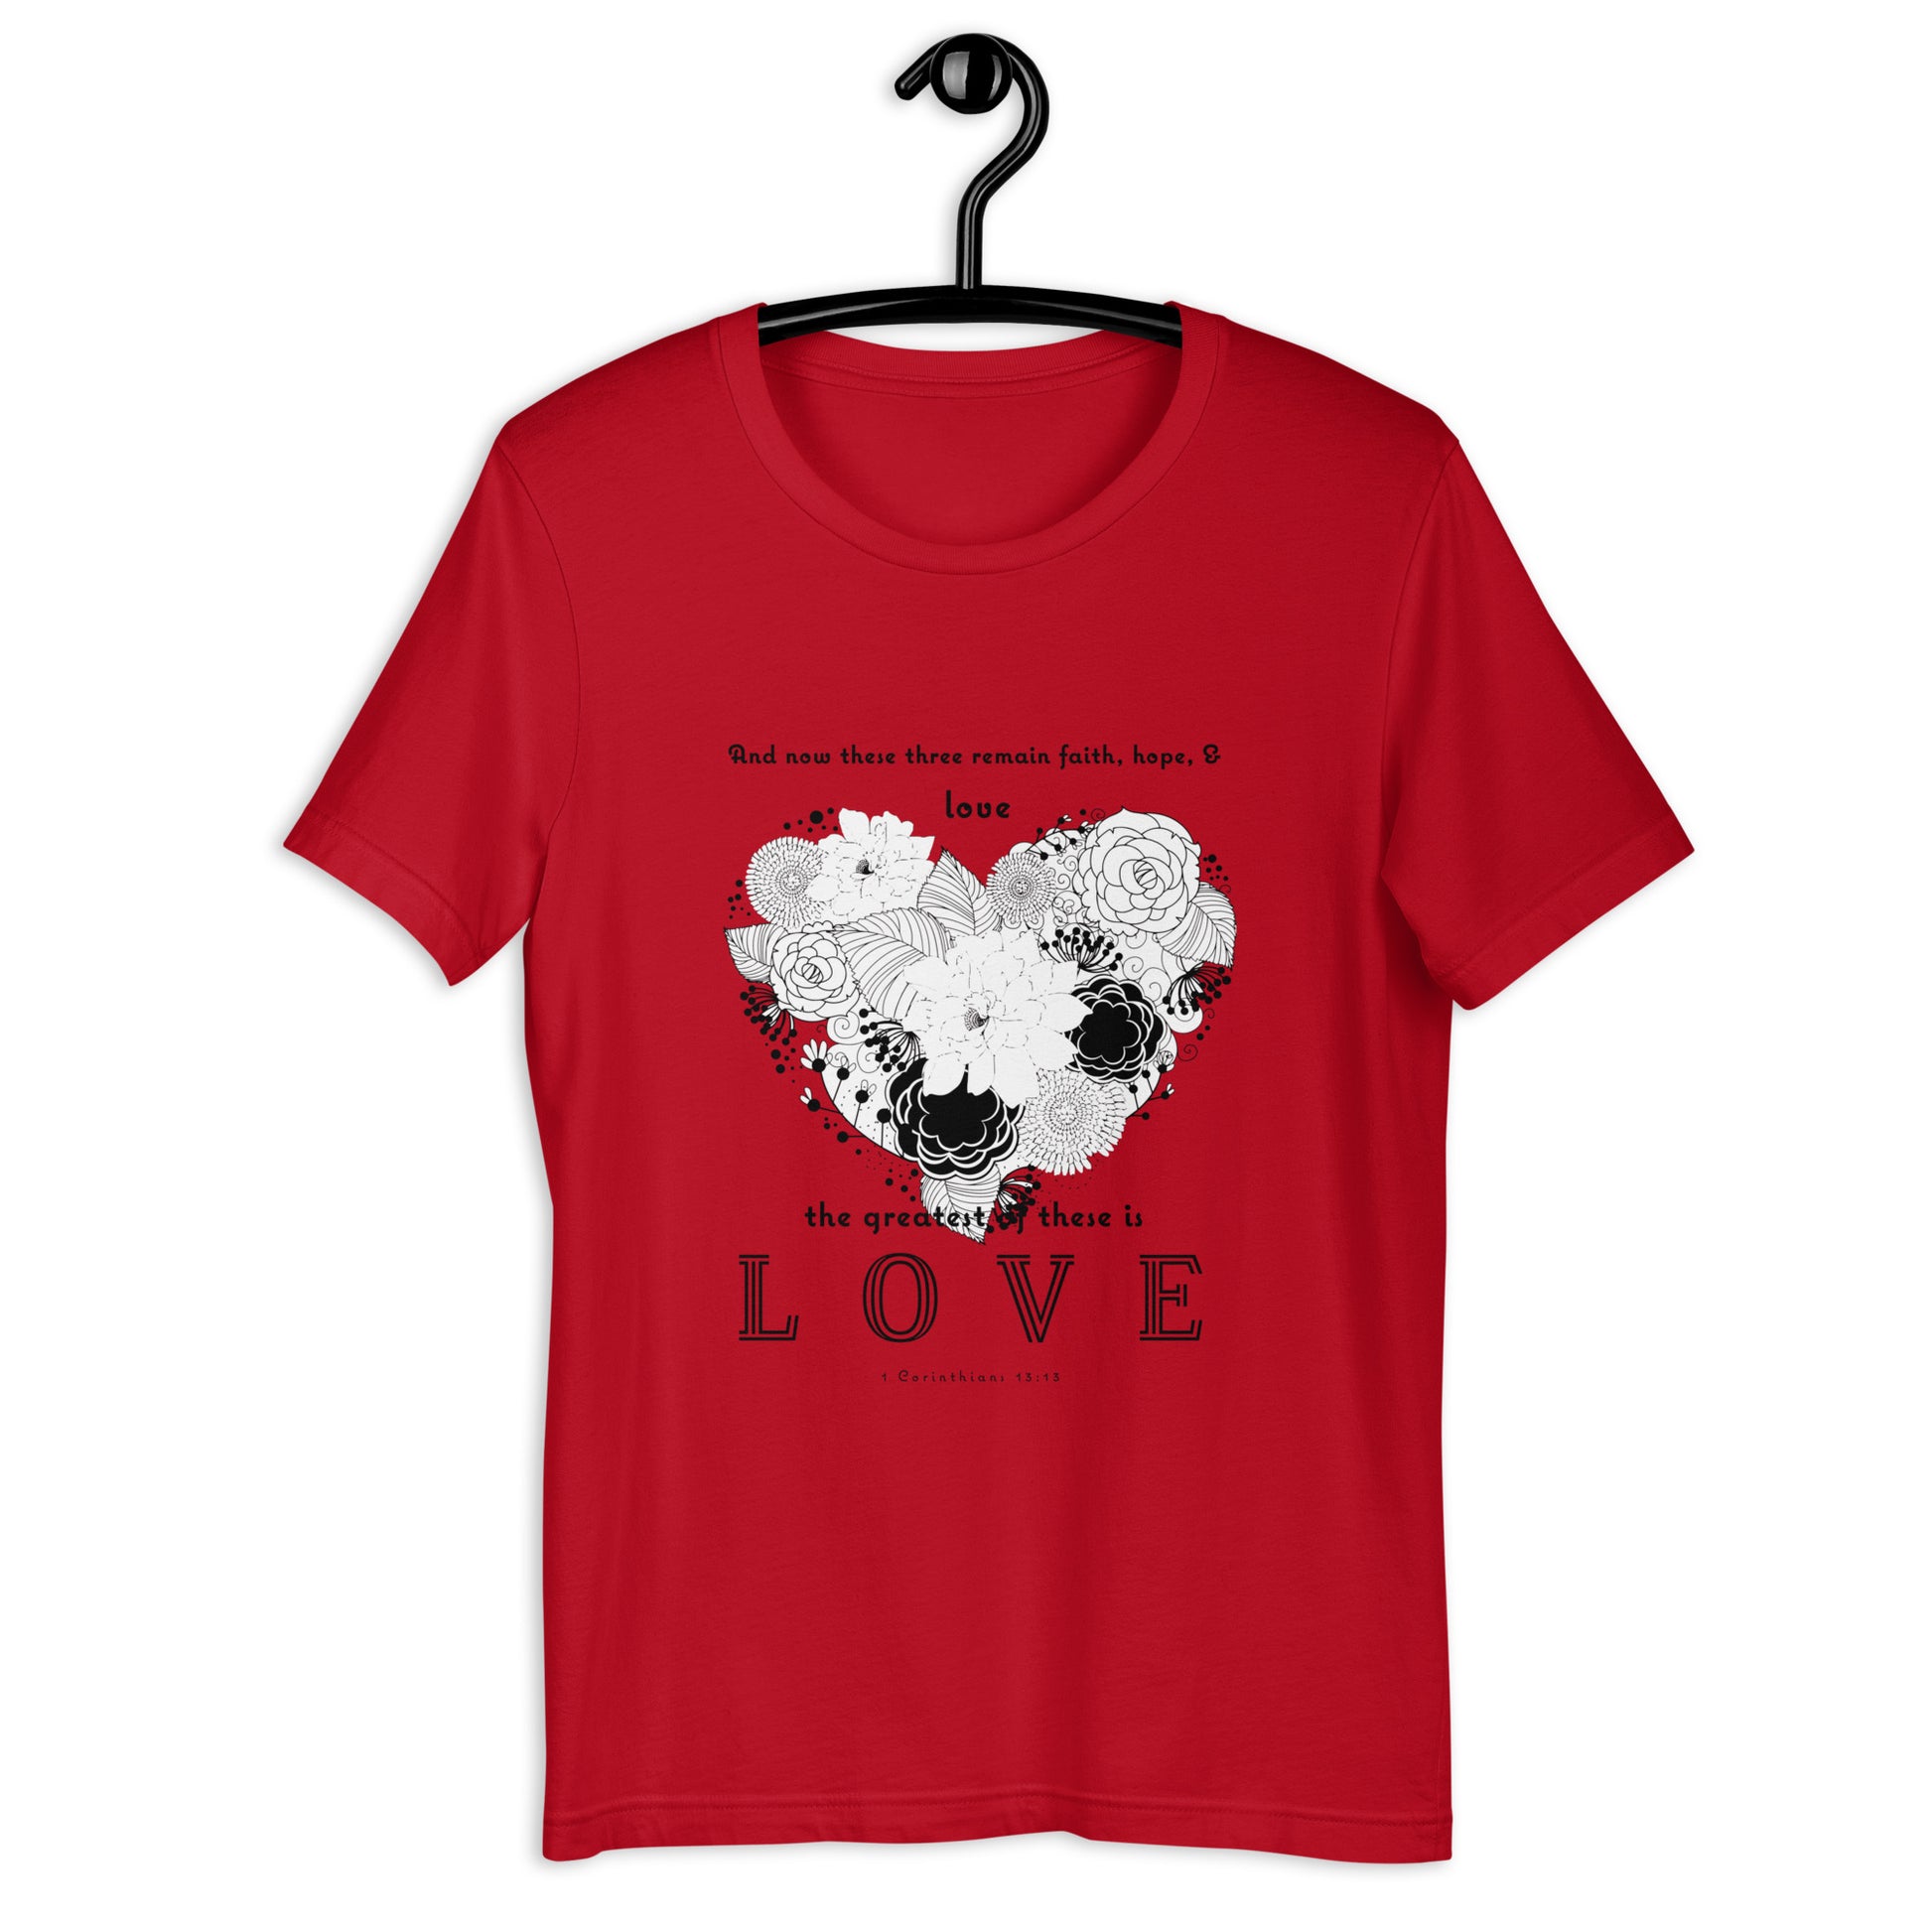 1 Corinthians 13:13 Greatest Love T-Shirt in Red - on hanger front view